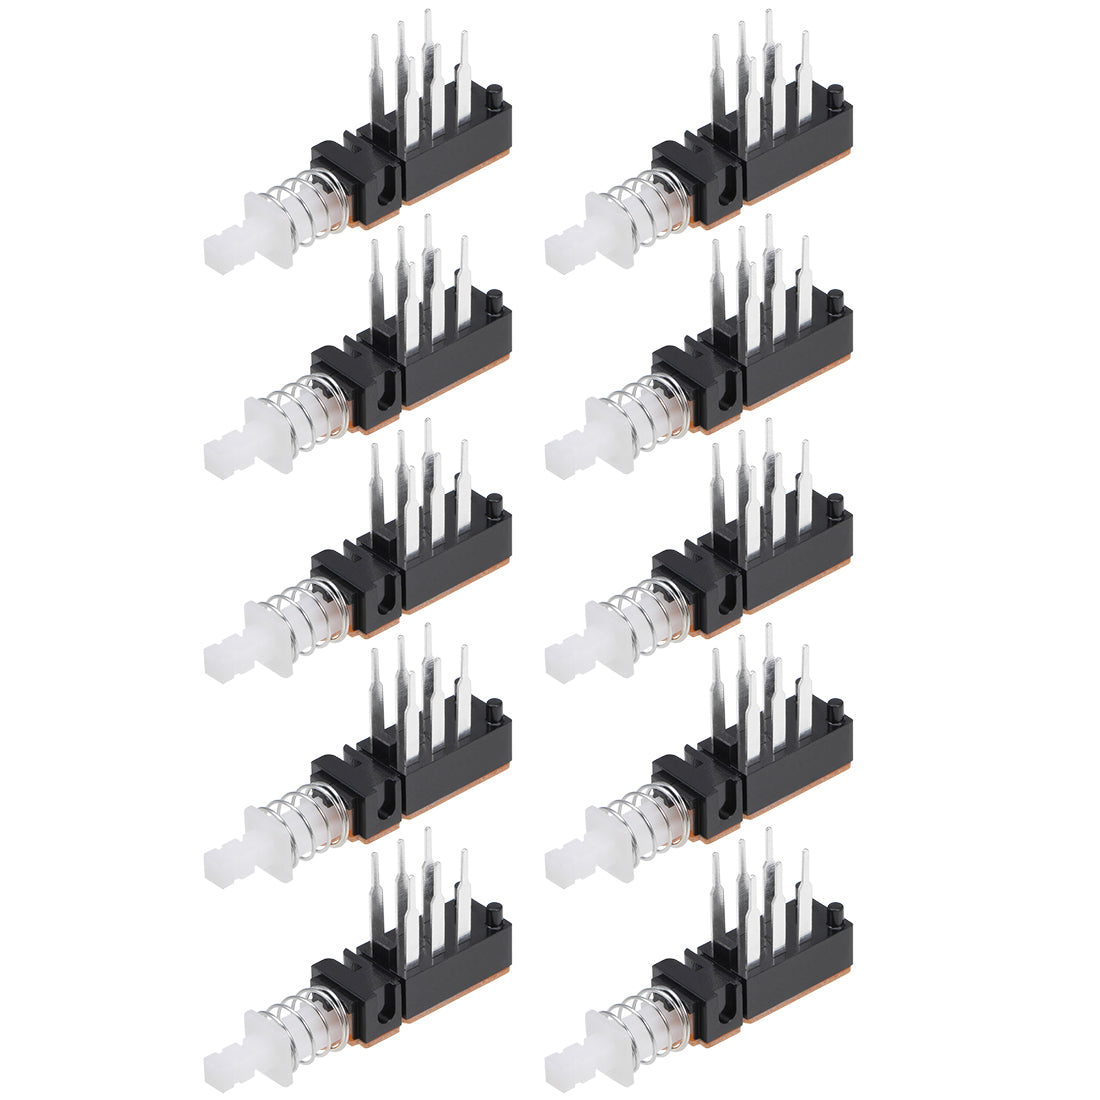 uxcell Uxcell Push Button Switch DPDT 6 Pin 1 Position Self-Locking 0.5" Long Pin 10pcs